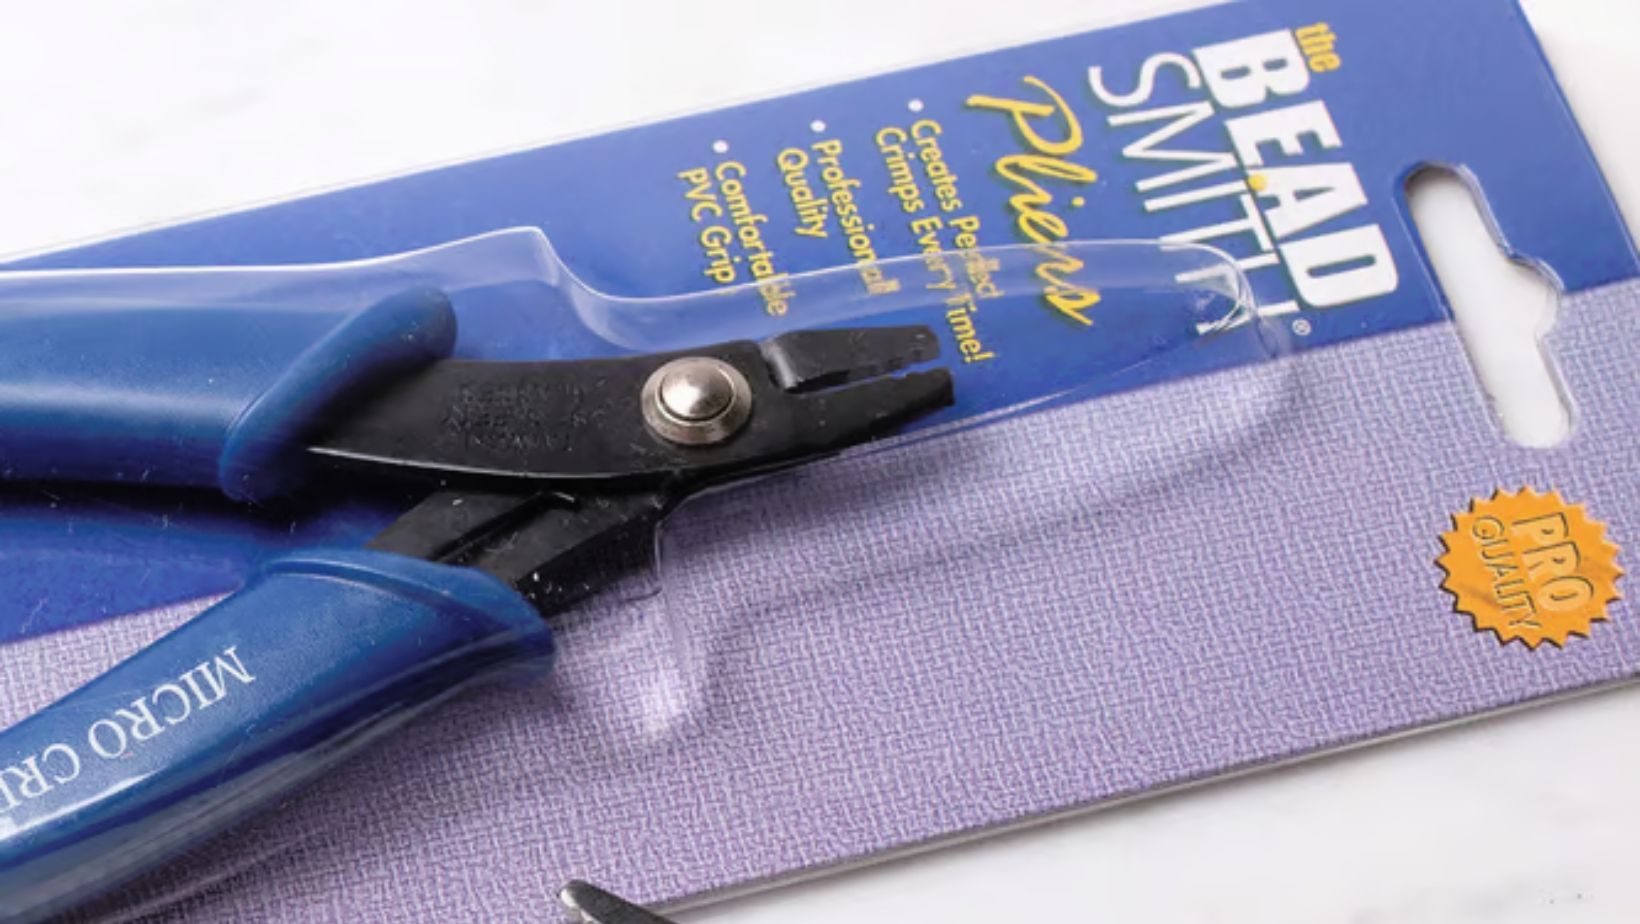 A Micro crimping pliers in a pack